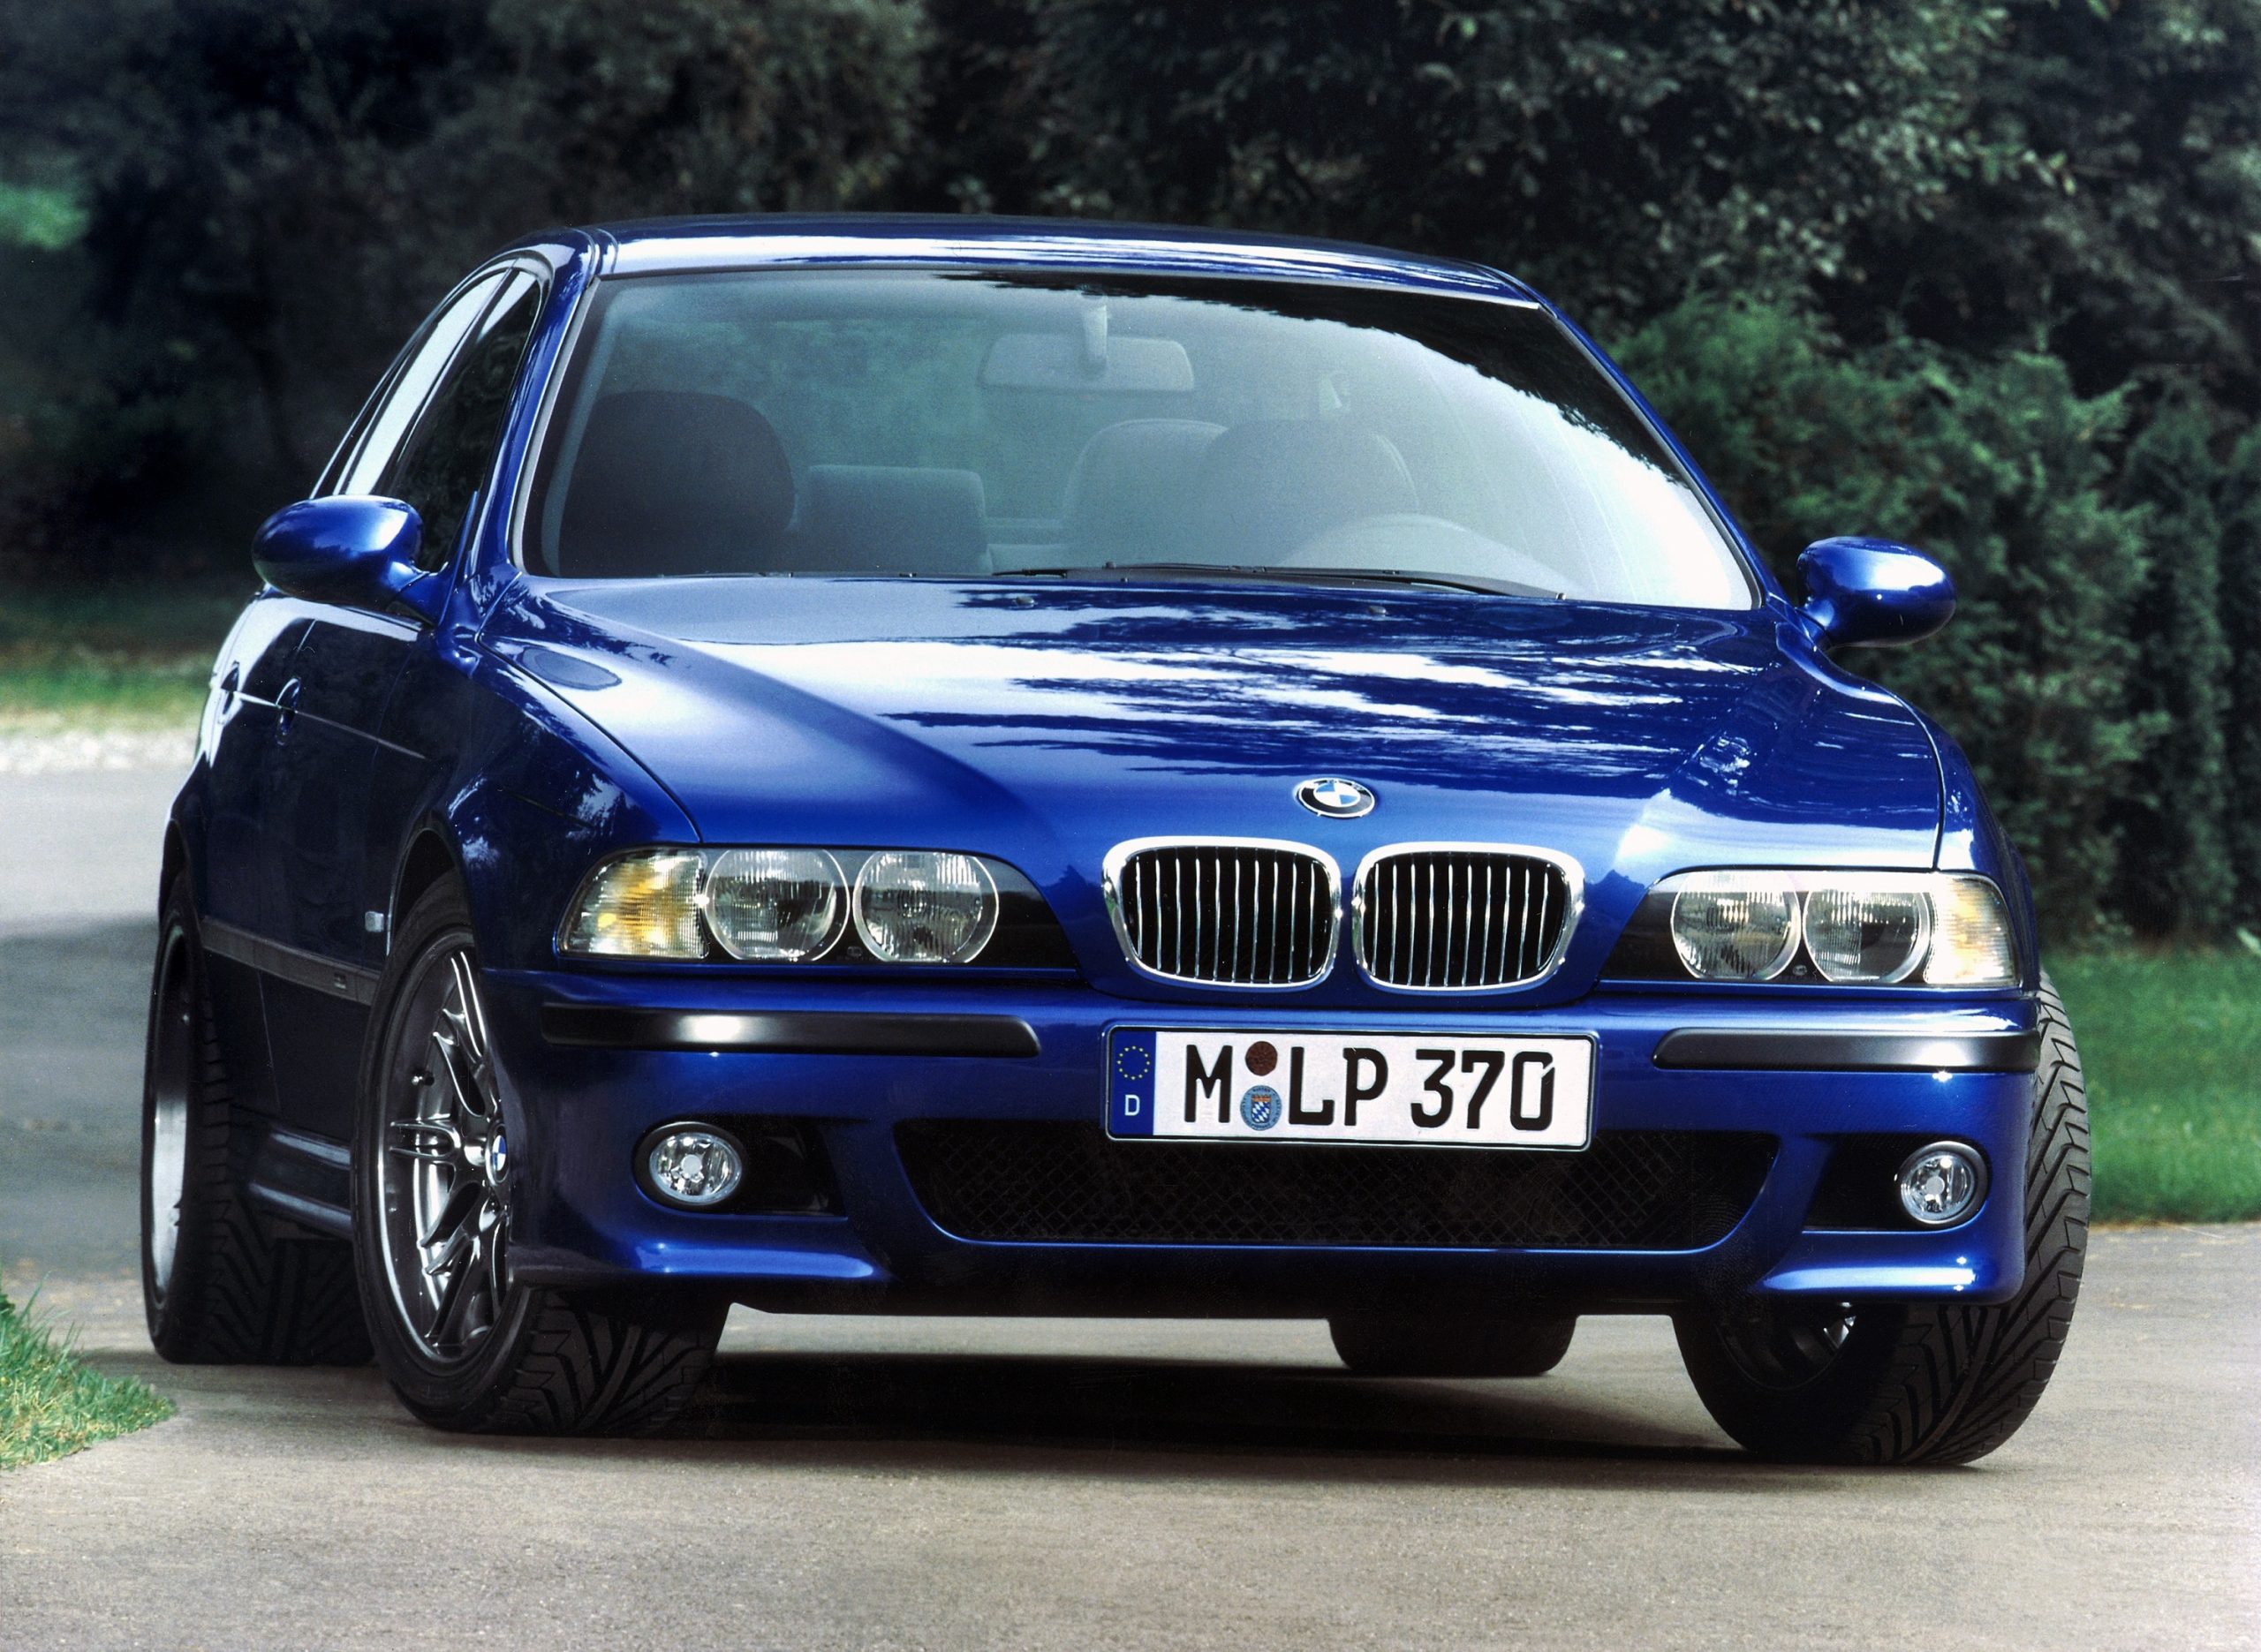 A blue E39 BMW M5 shot from the font 3/4 angle